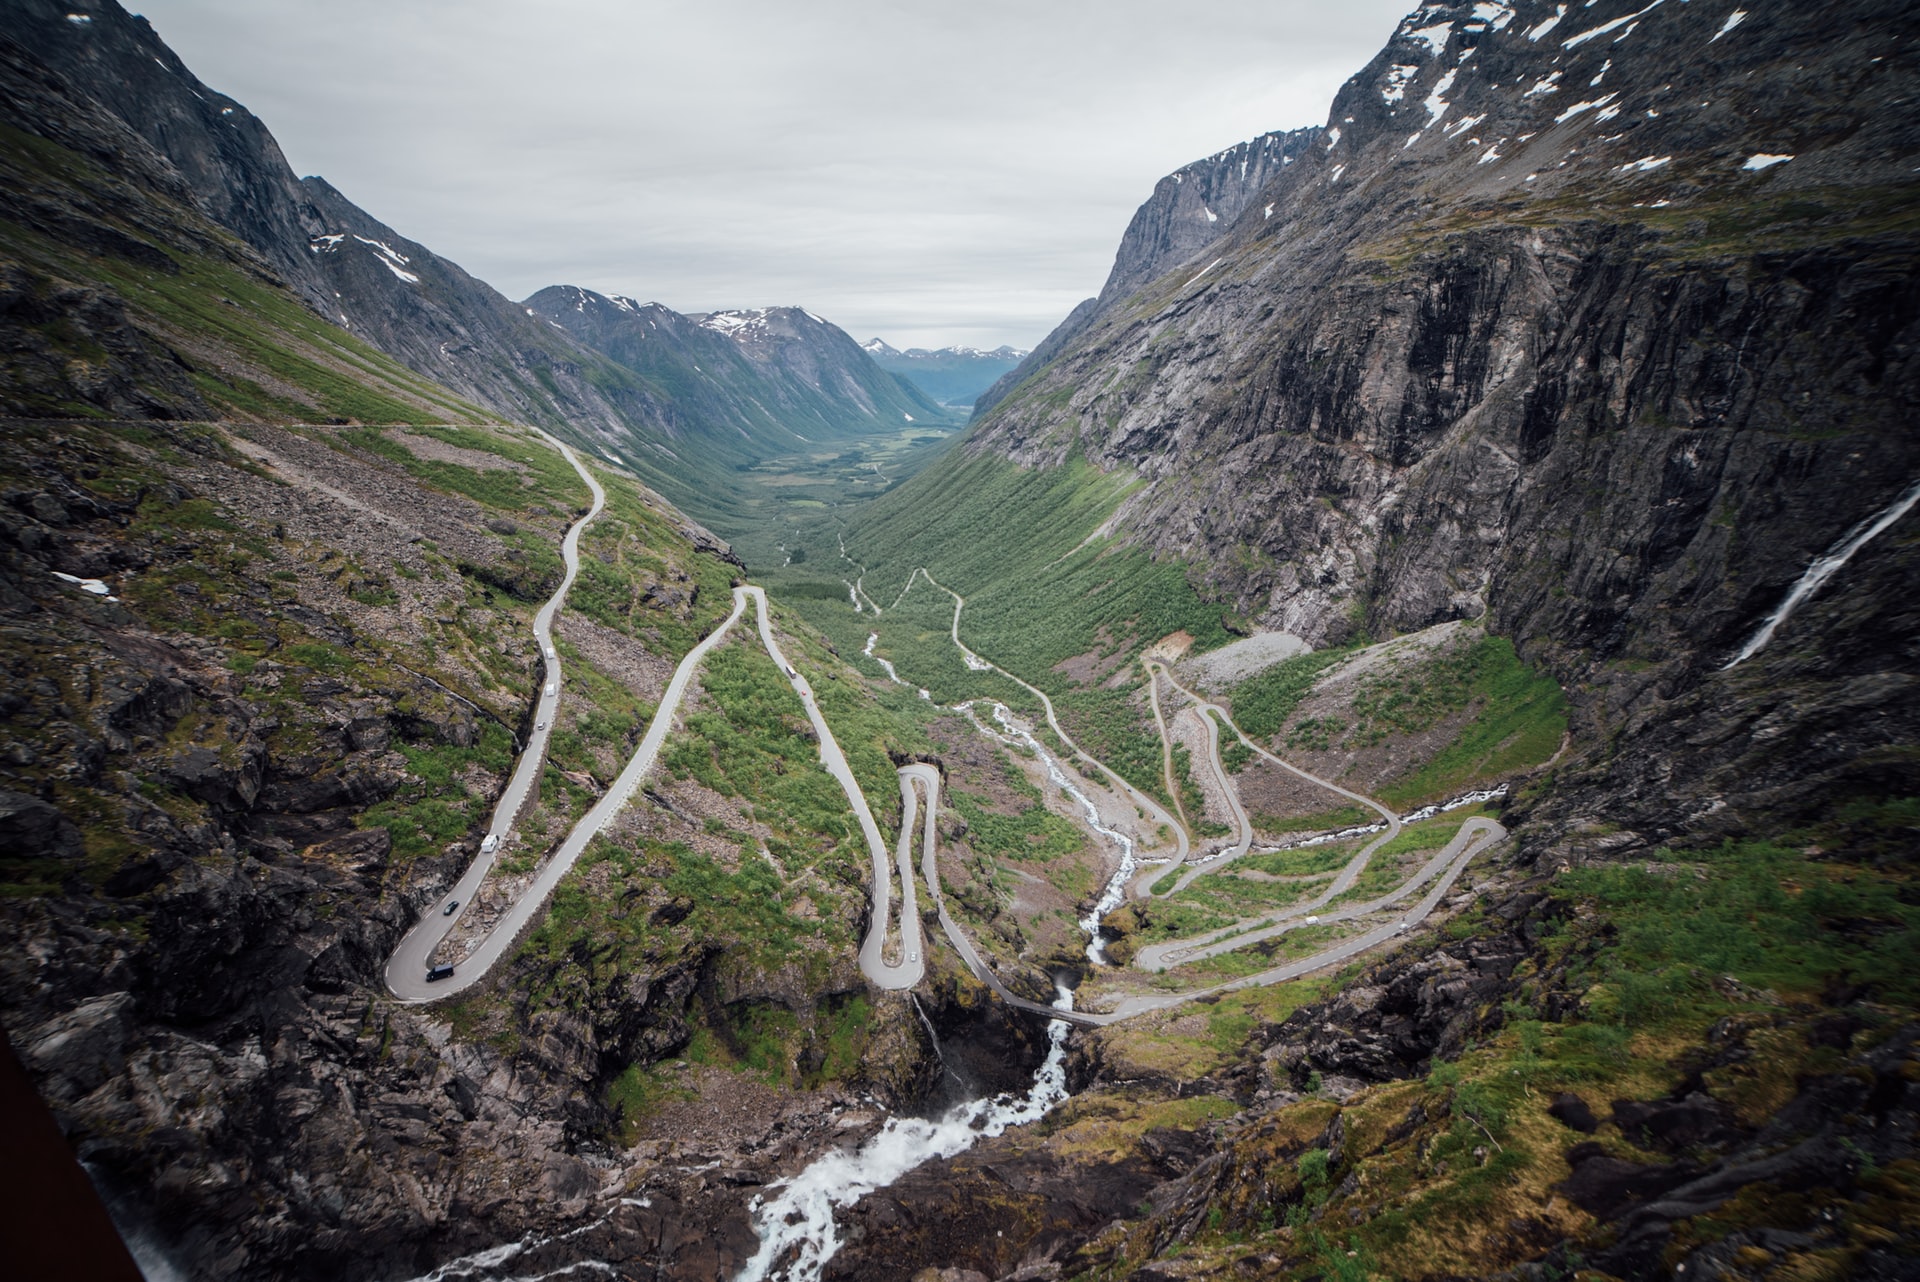 Norway puts more electric cars on the road than any other country in the world. And look at that road!